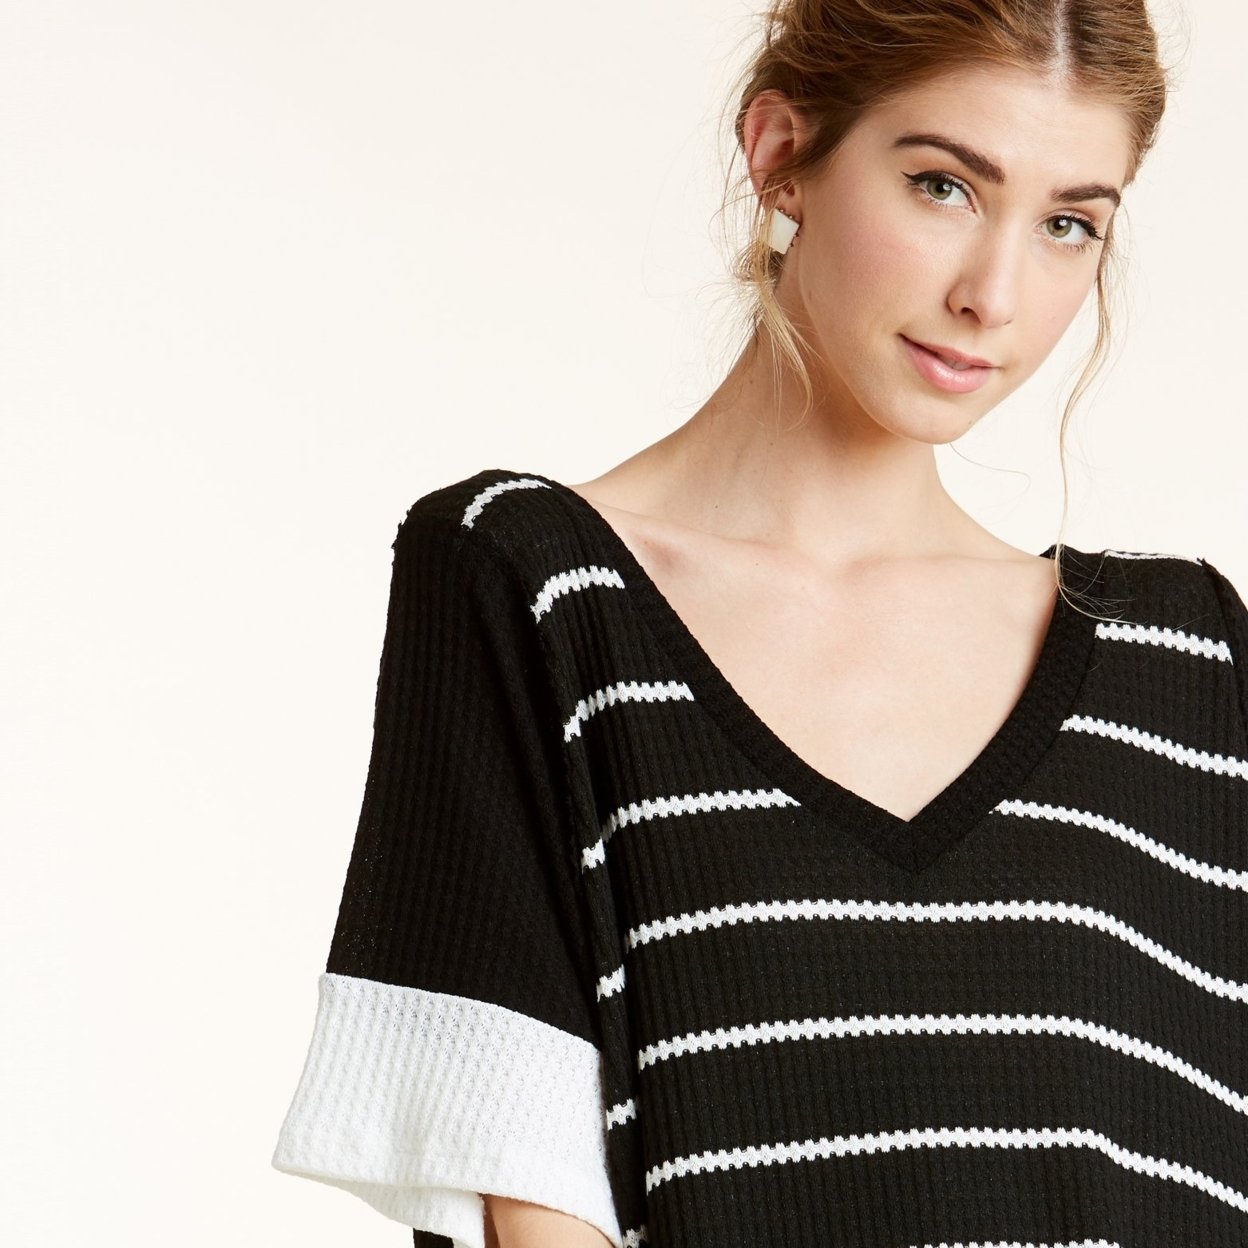 Waffle Knit Contrast Top - Black, Small (2-6)